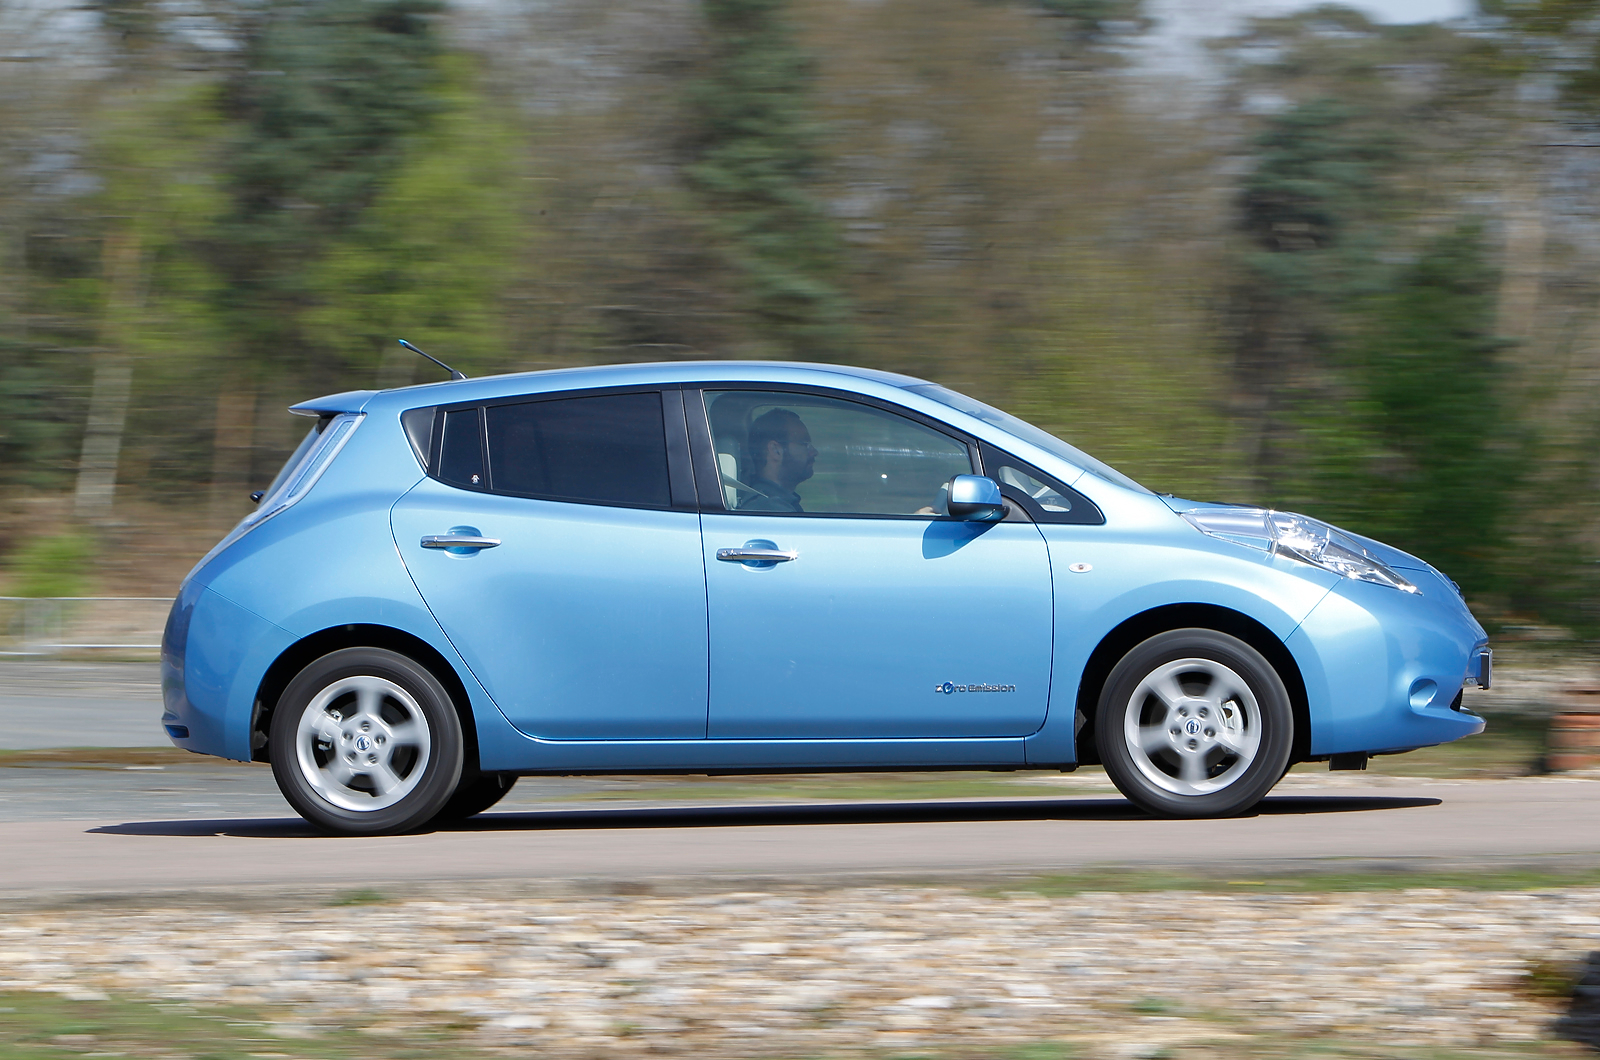 How long can the nissan leaf run on one charge